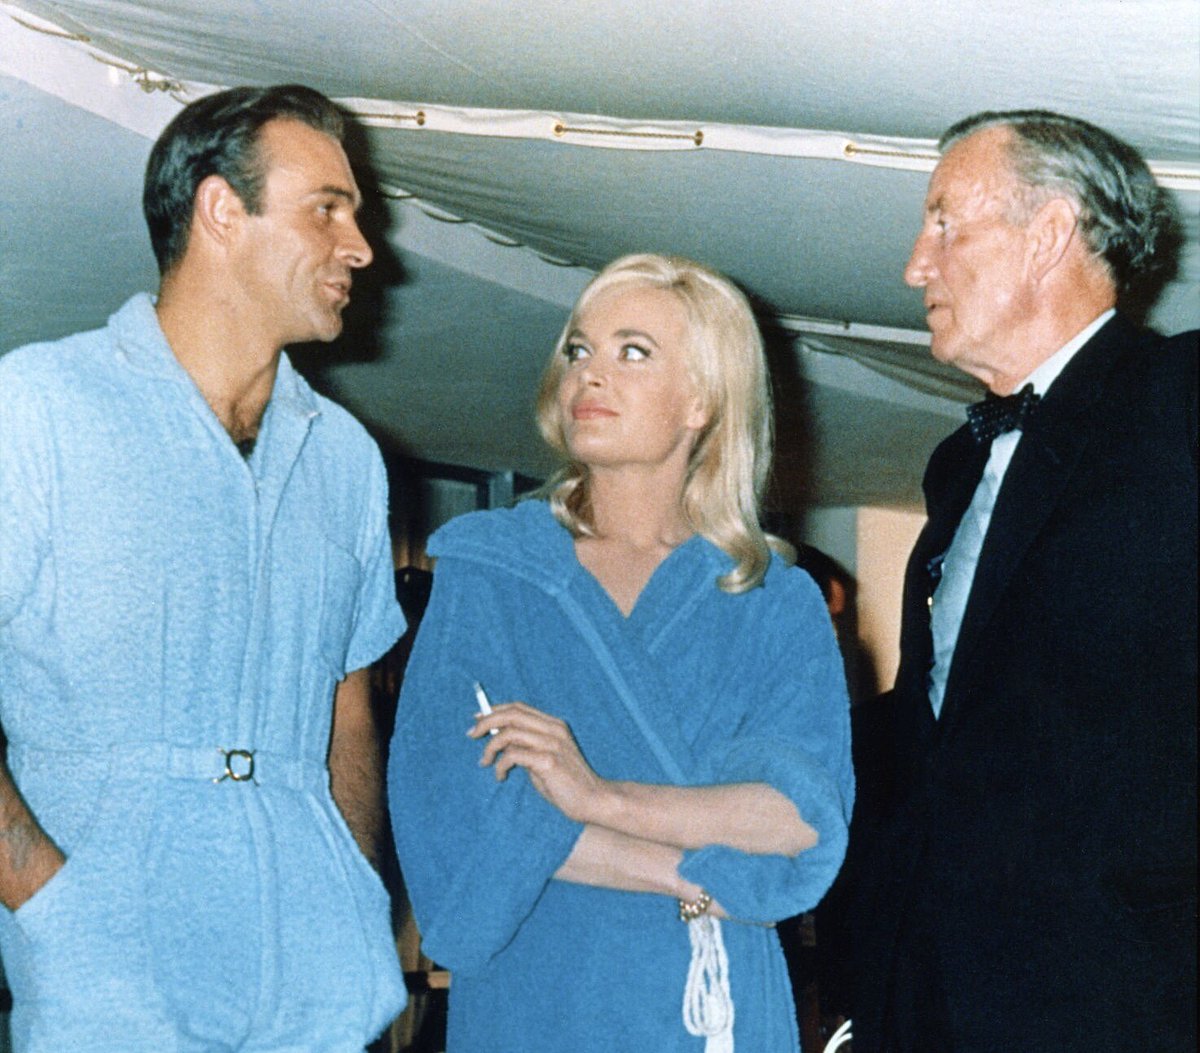 Ian Fleming photographed here with Sean Connery and Shirley Eaton on the set of “GOLDFINGER” (1964) at @PinewoodStudios